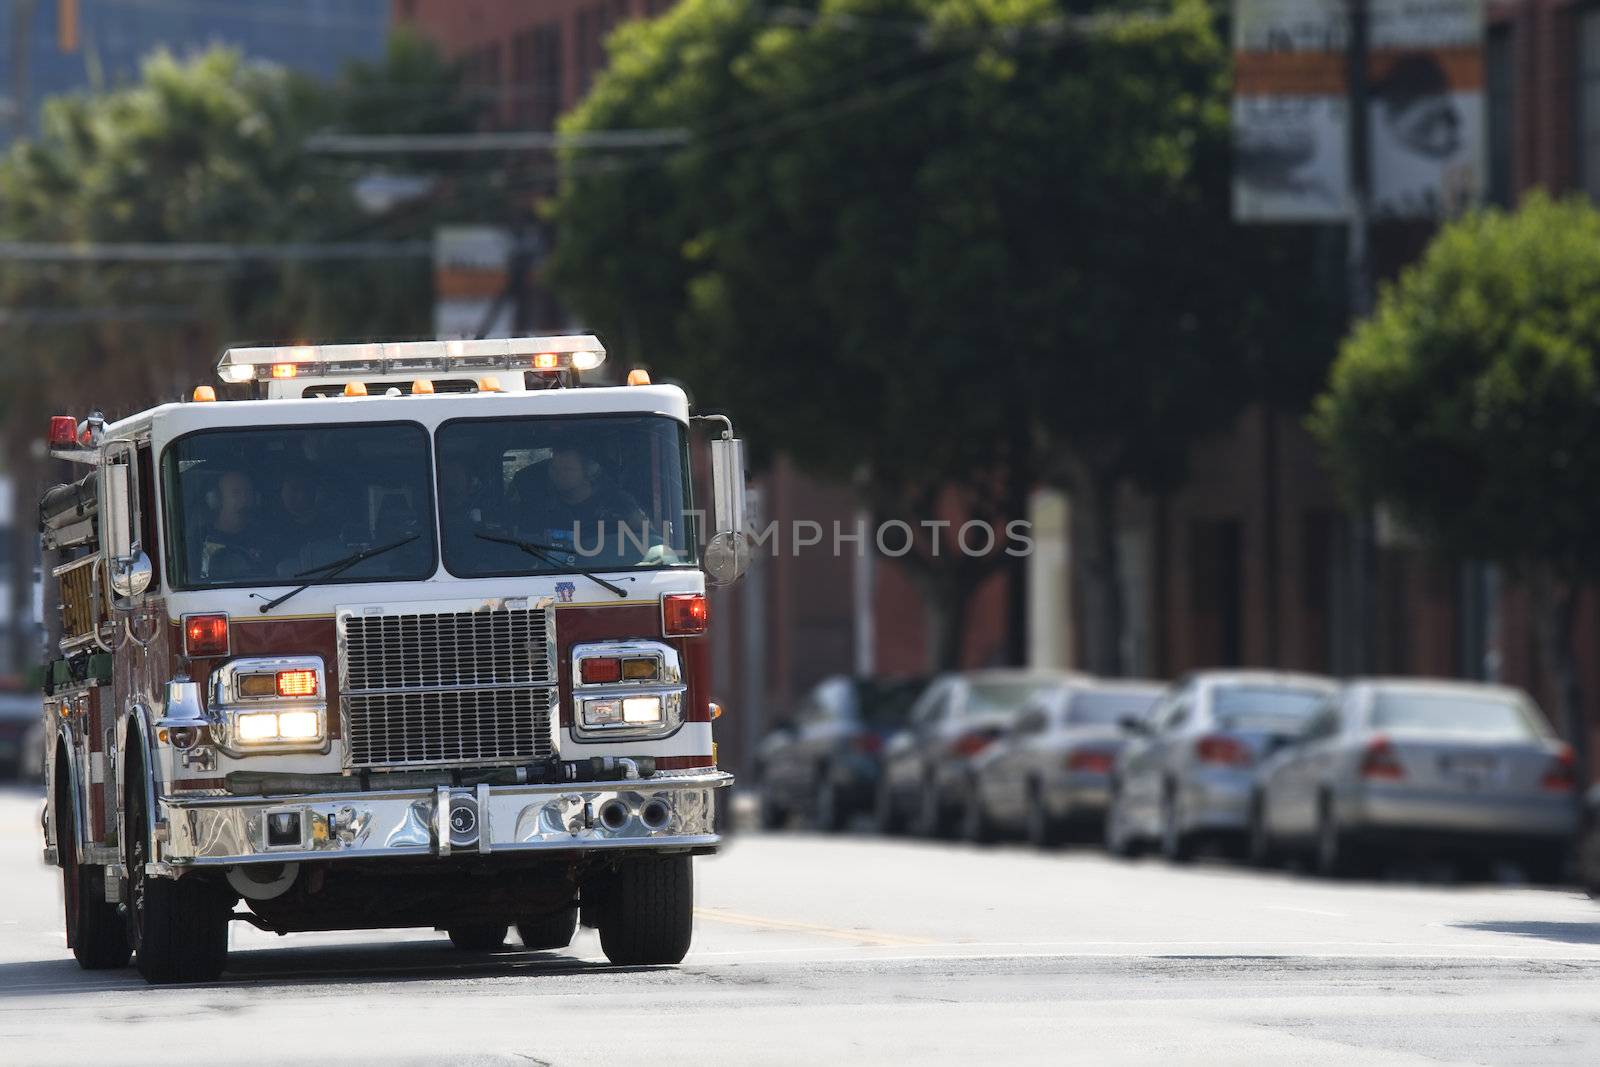 fire truck by LWPhotog